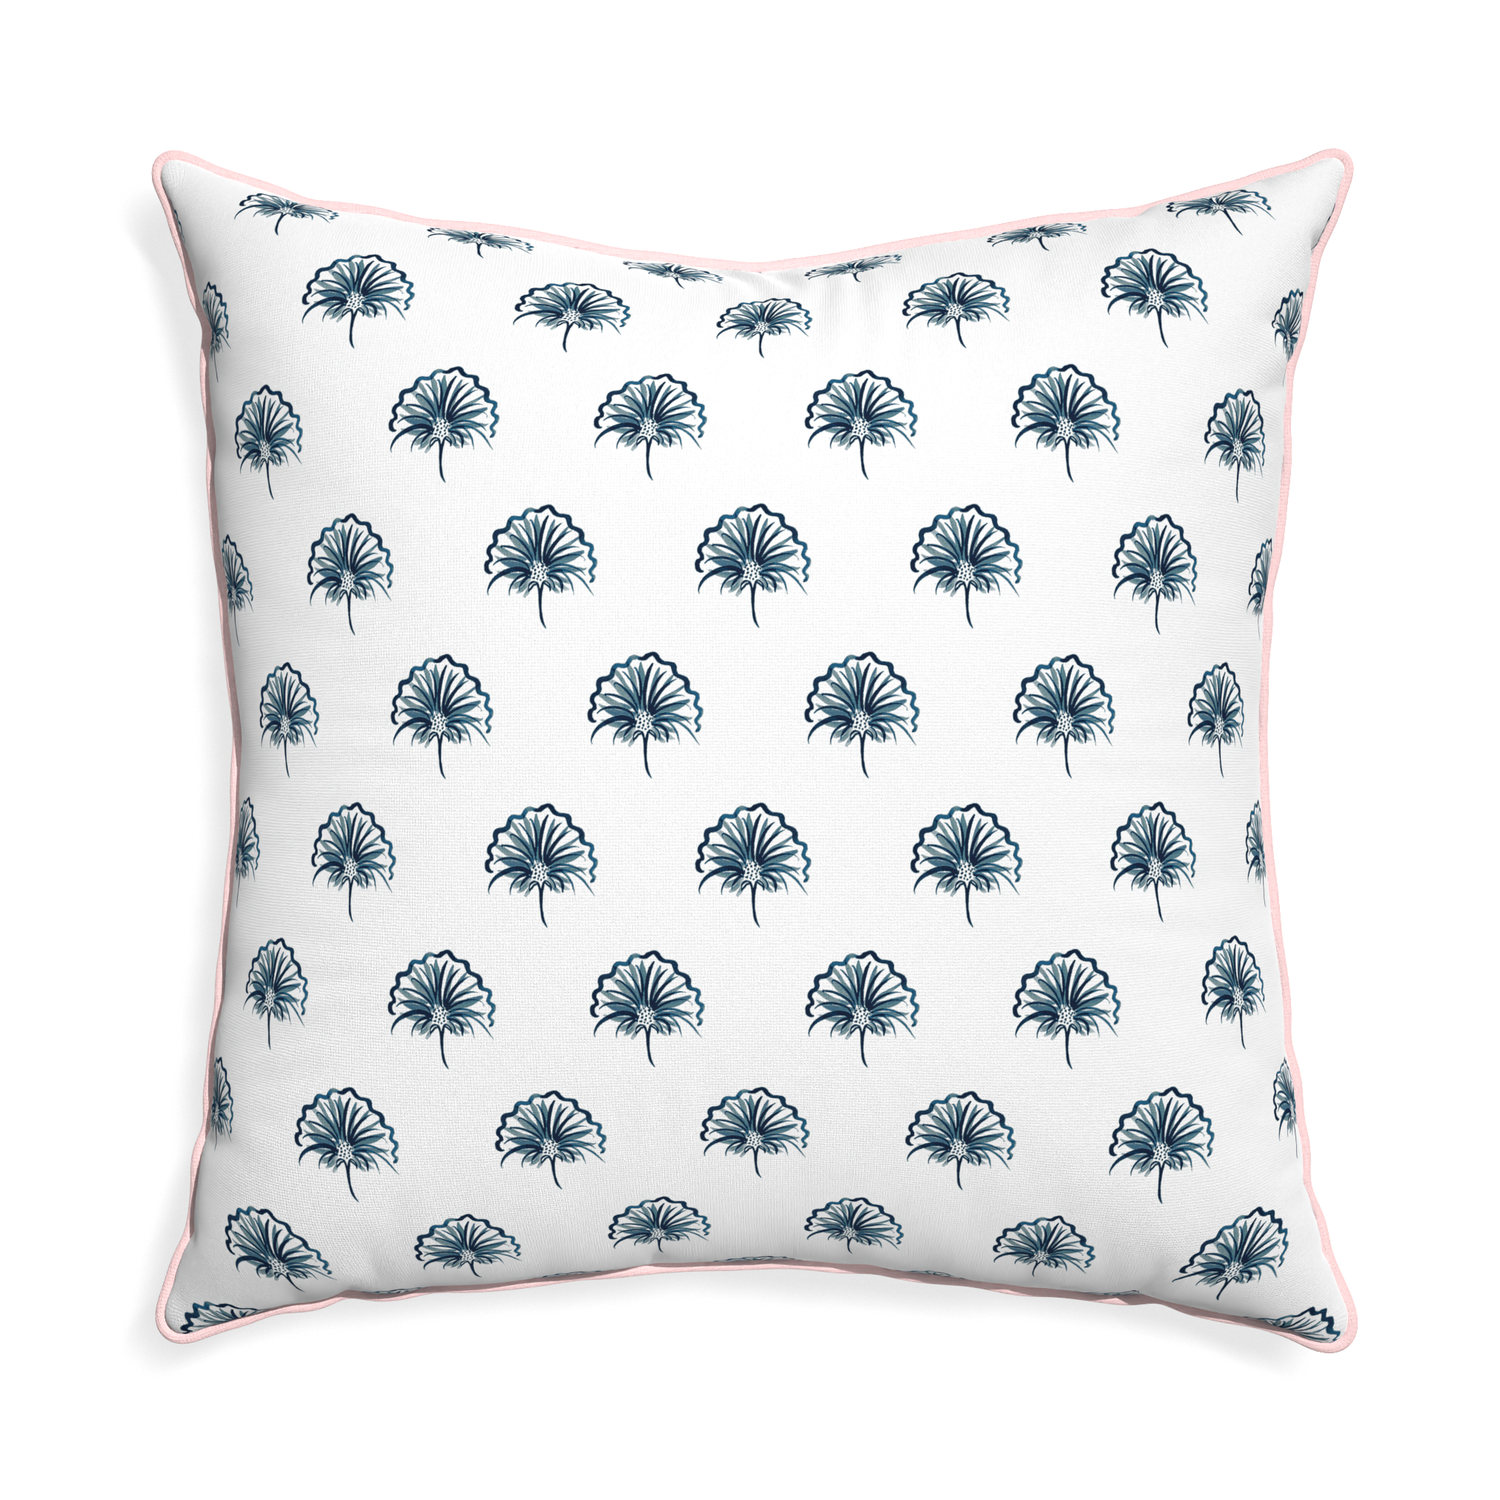 Euro-sham penelope midnight custom floral navypillow with petal piping on white background